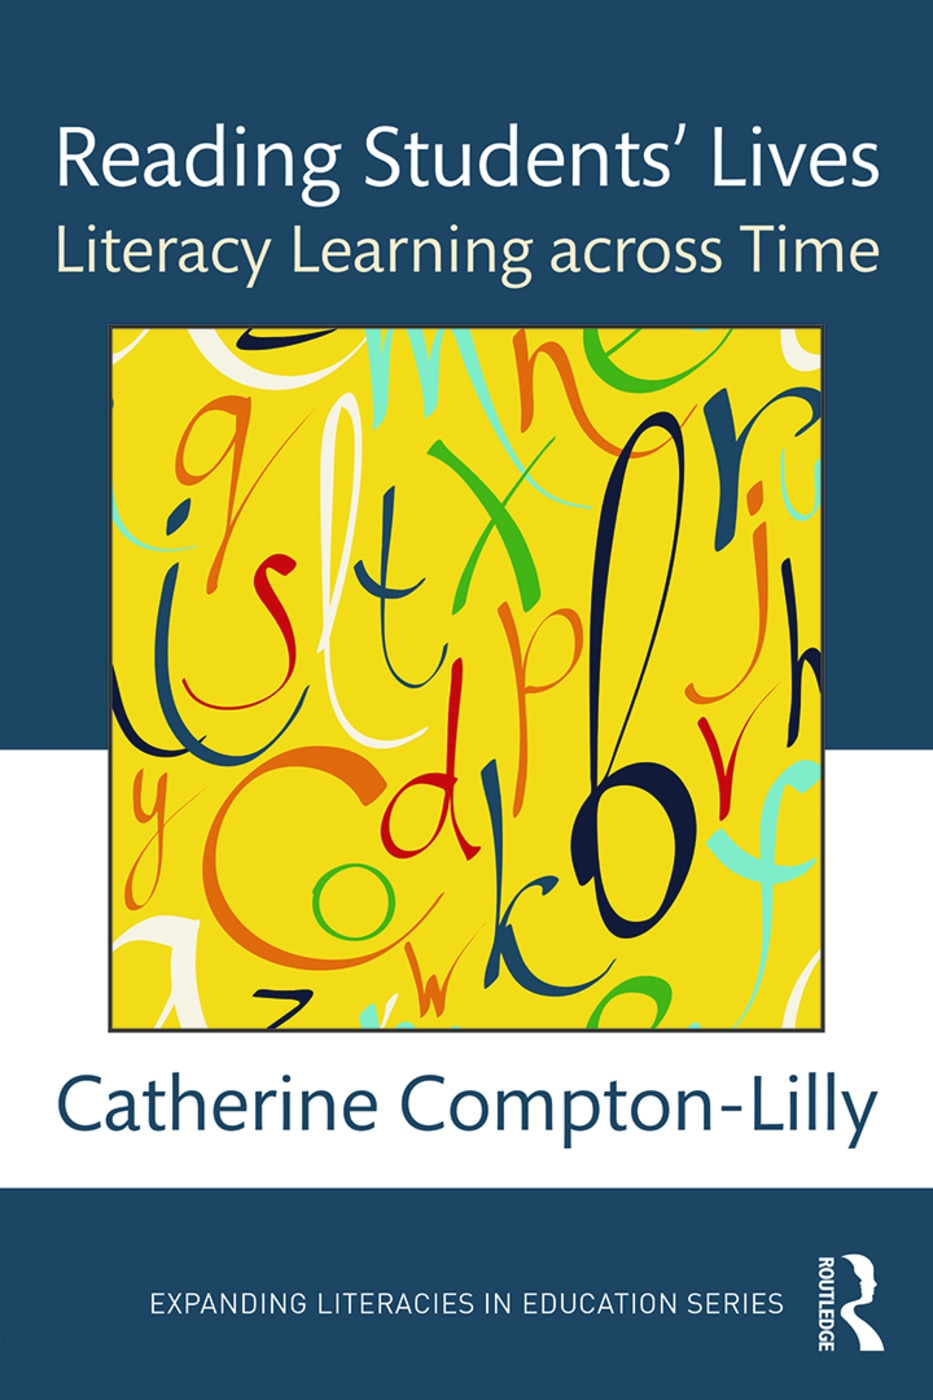 Reading Students’ Lives: Literacy Learning Across Time